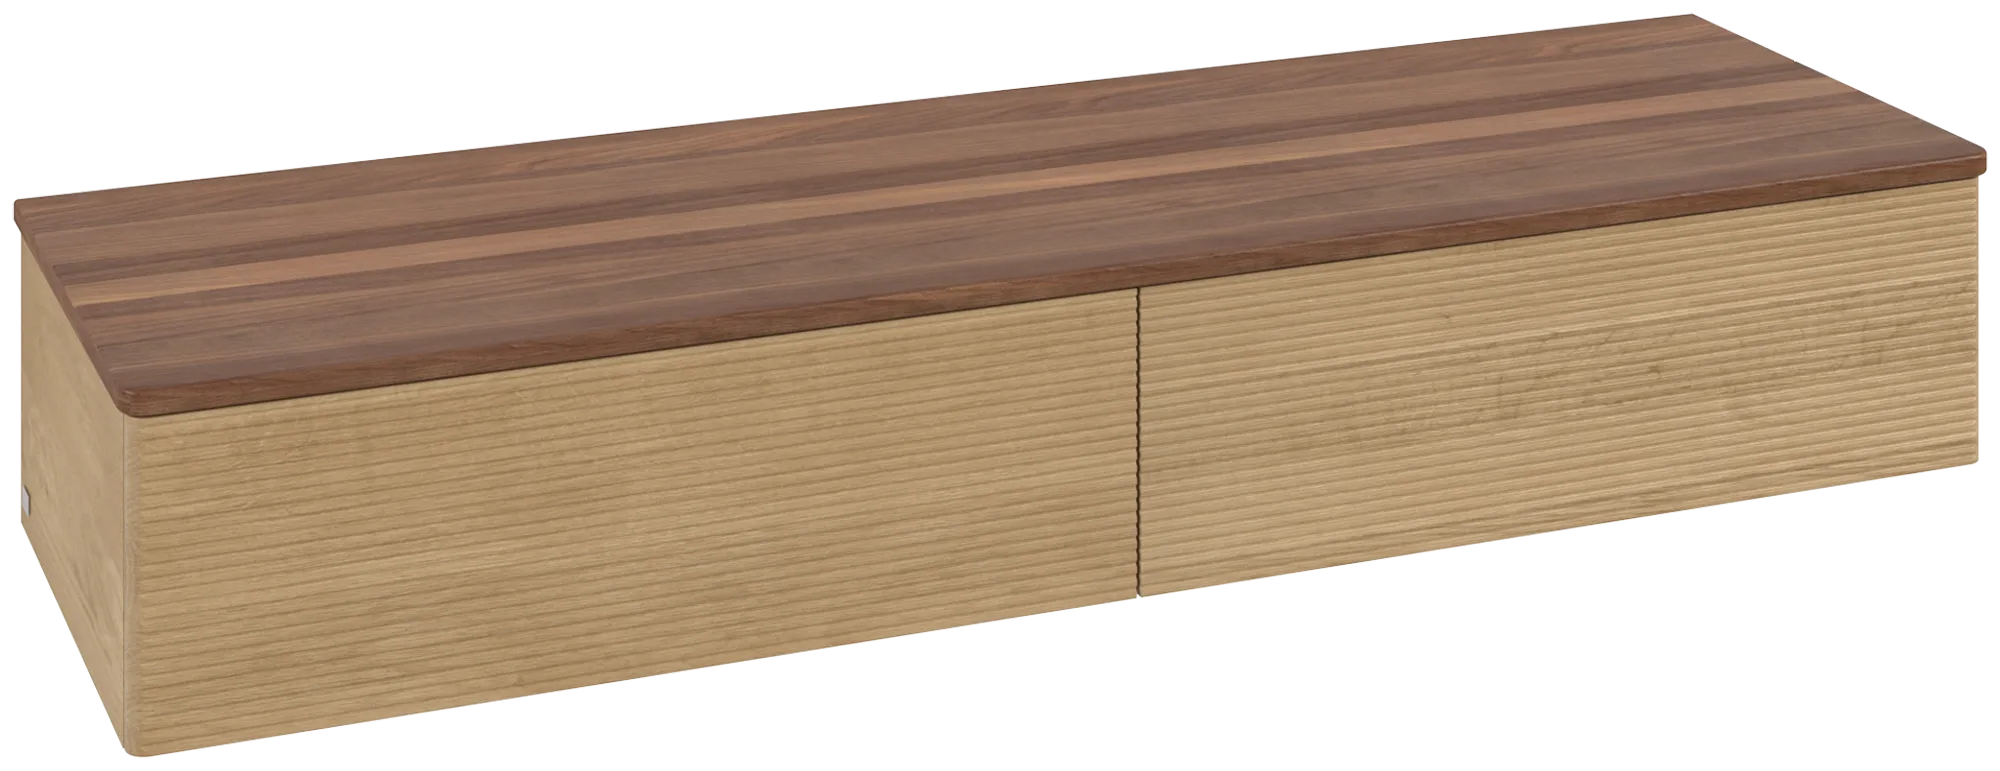 Picture of VILLEROY BOCH Antao Sideboard, 2 pull-out compartments, 1600 x 268 x 500 mm, Front with grain texture, Honey Oak / Warm Walnut #K42102HN